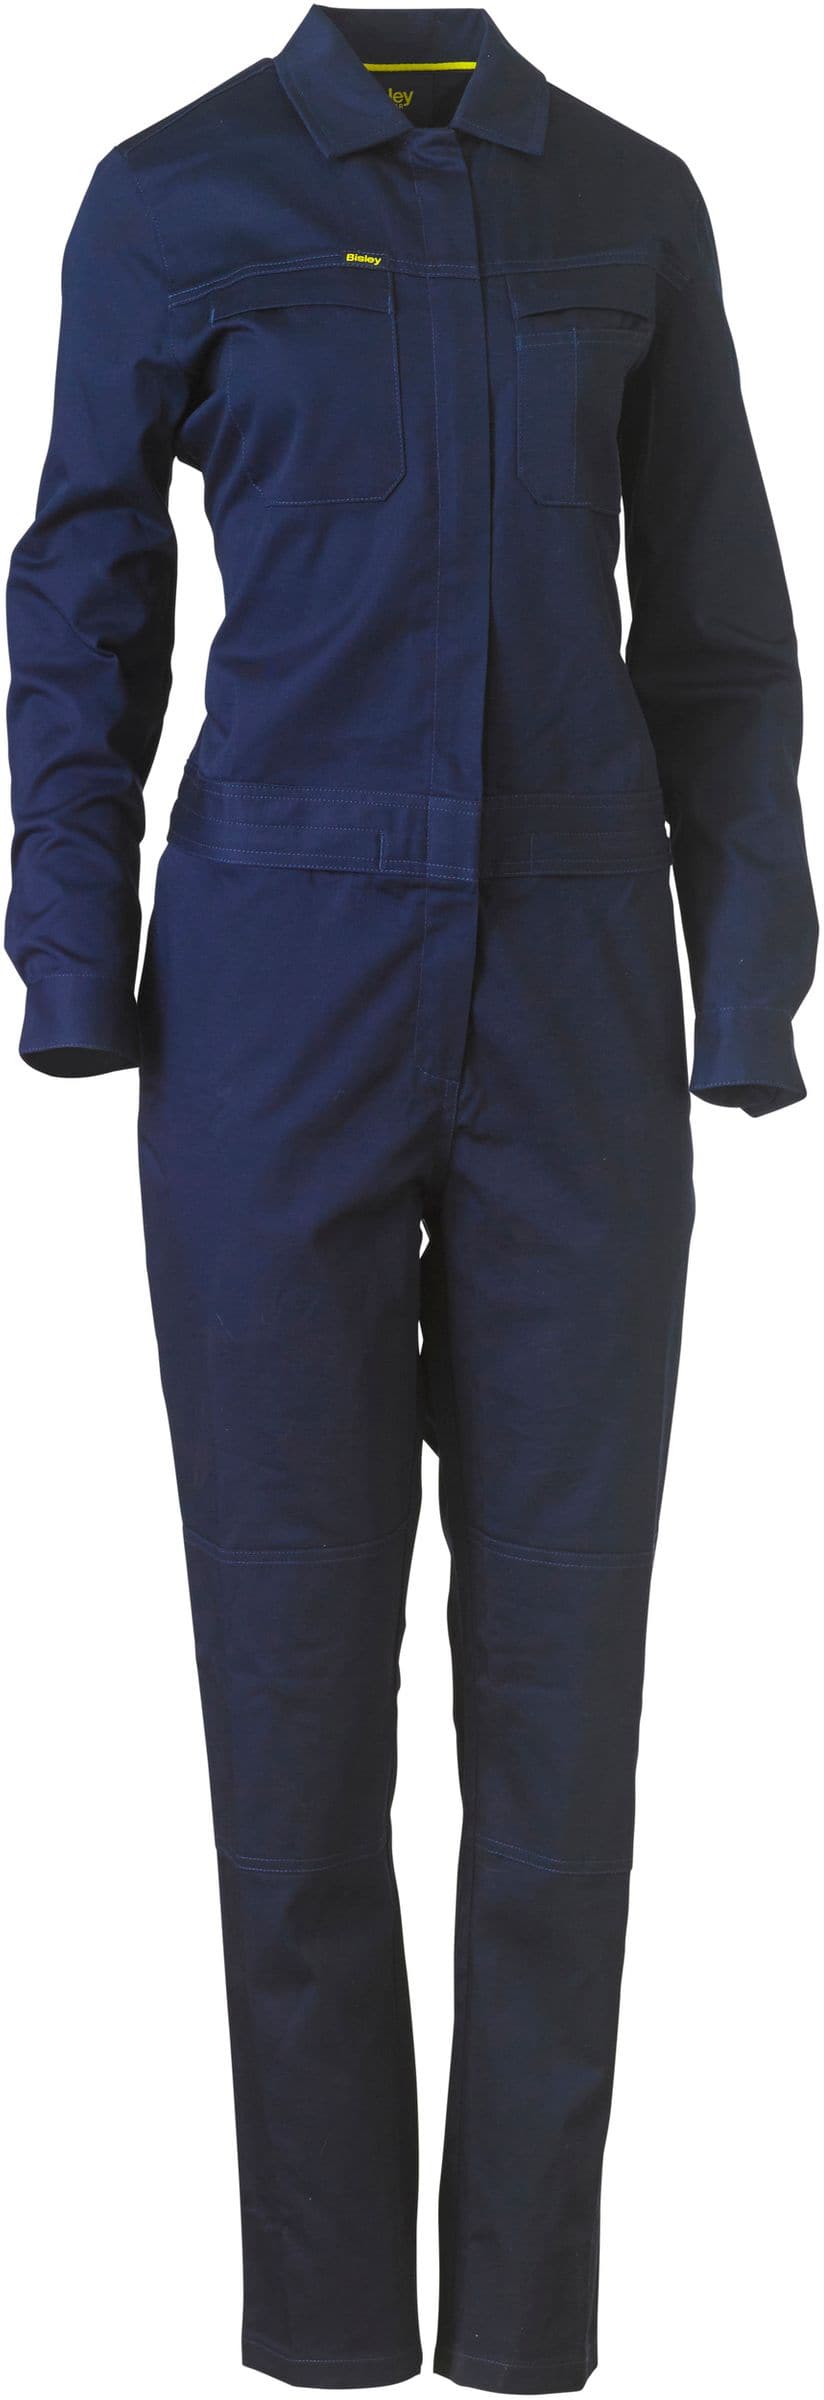 Bisley Bisley Womens Cotton Drill Coverall (BCL6065) - Trade Wear